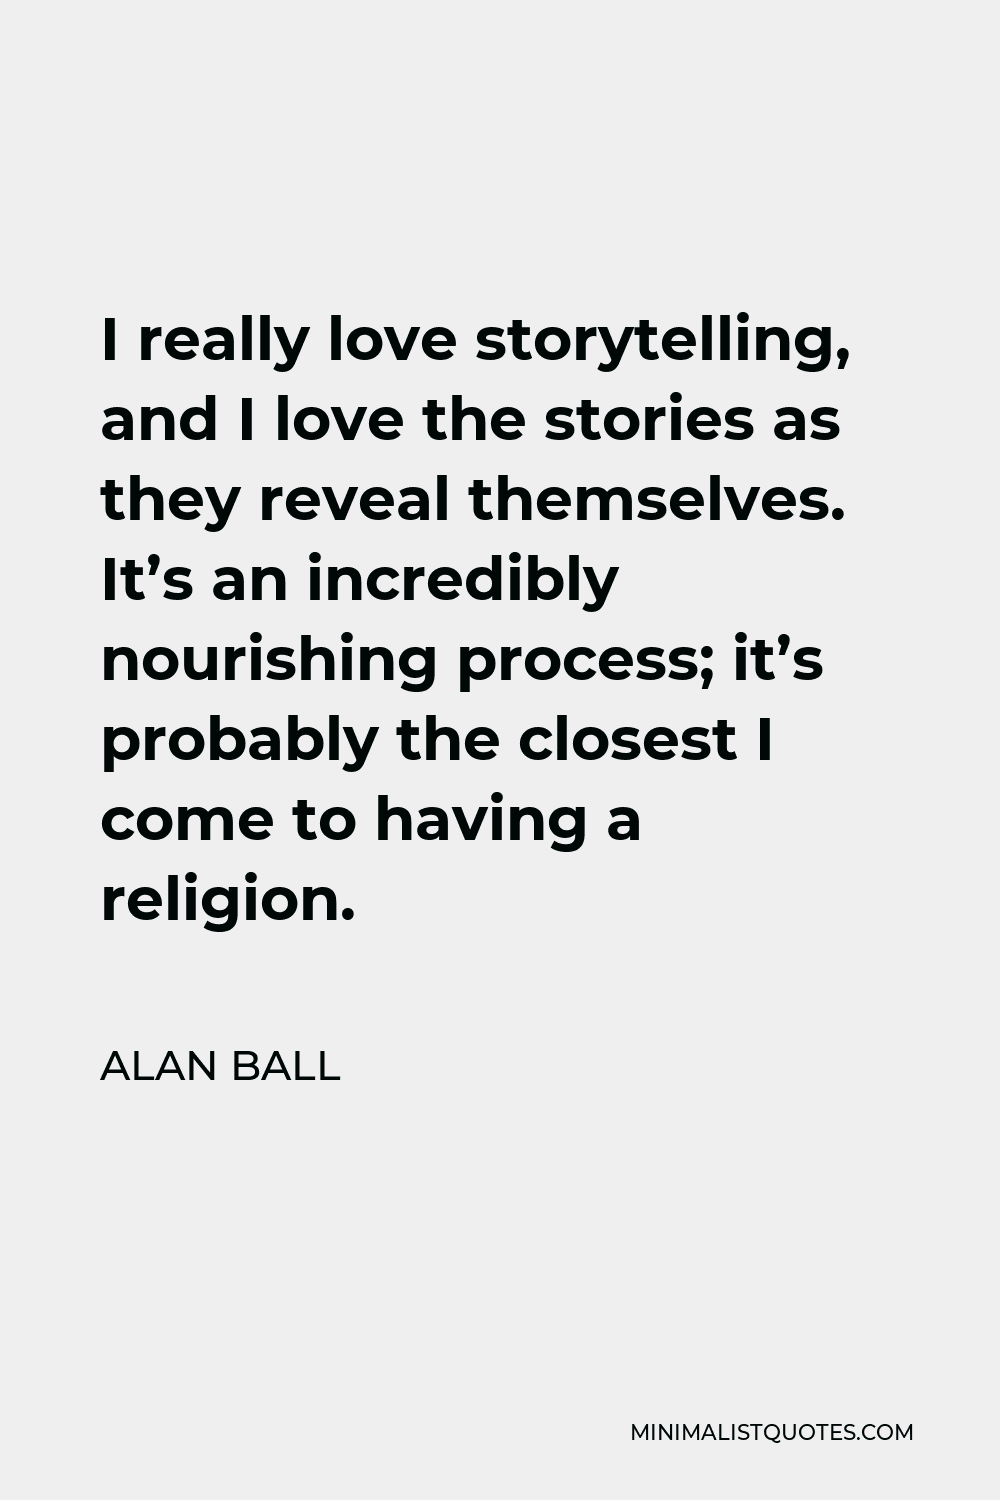 Alan Ball Quote - I really love storytelling, and I love the stories as they reveal themselves. It’s an incredibly nourishing process; it’s probably the closest I come to having a religion.